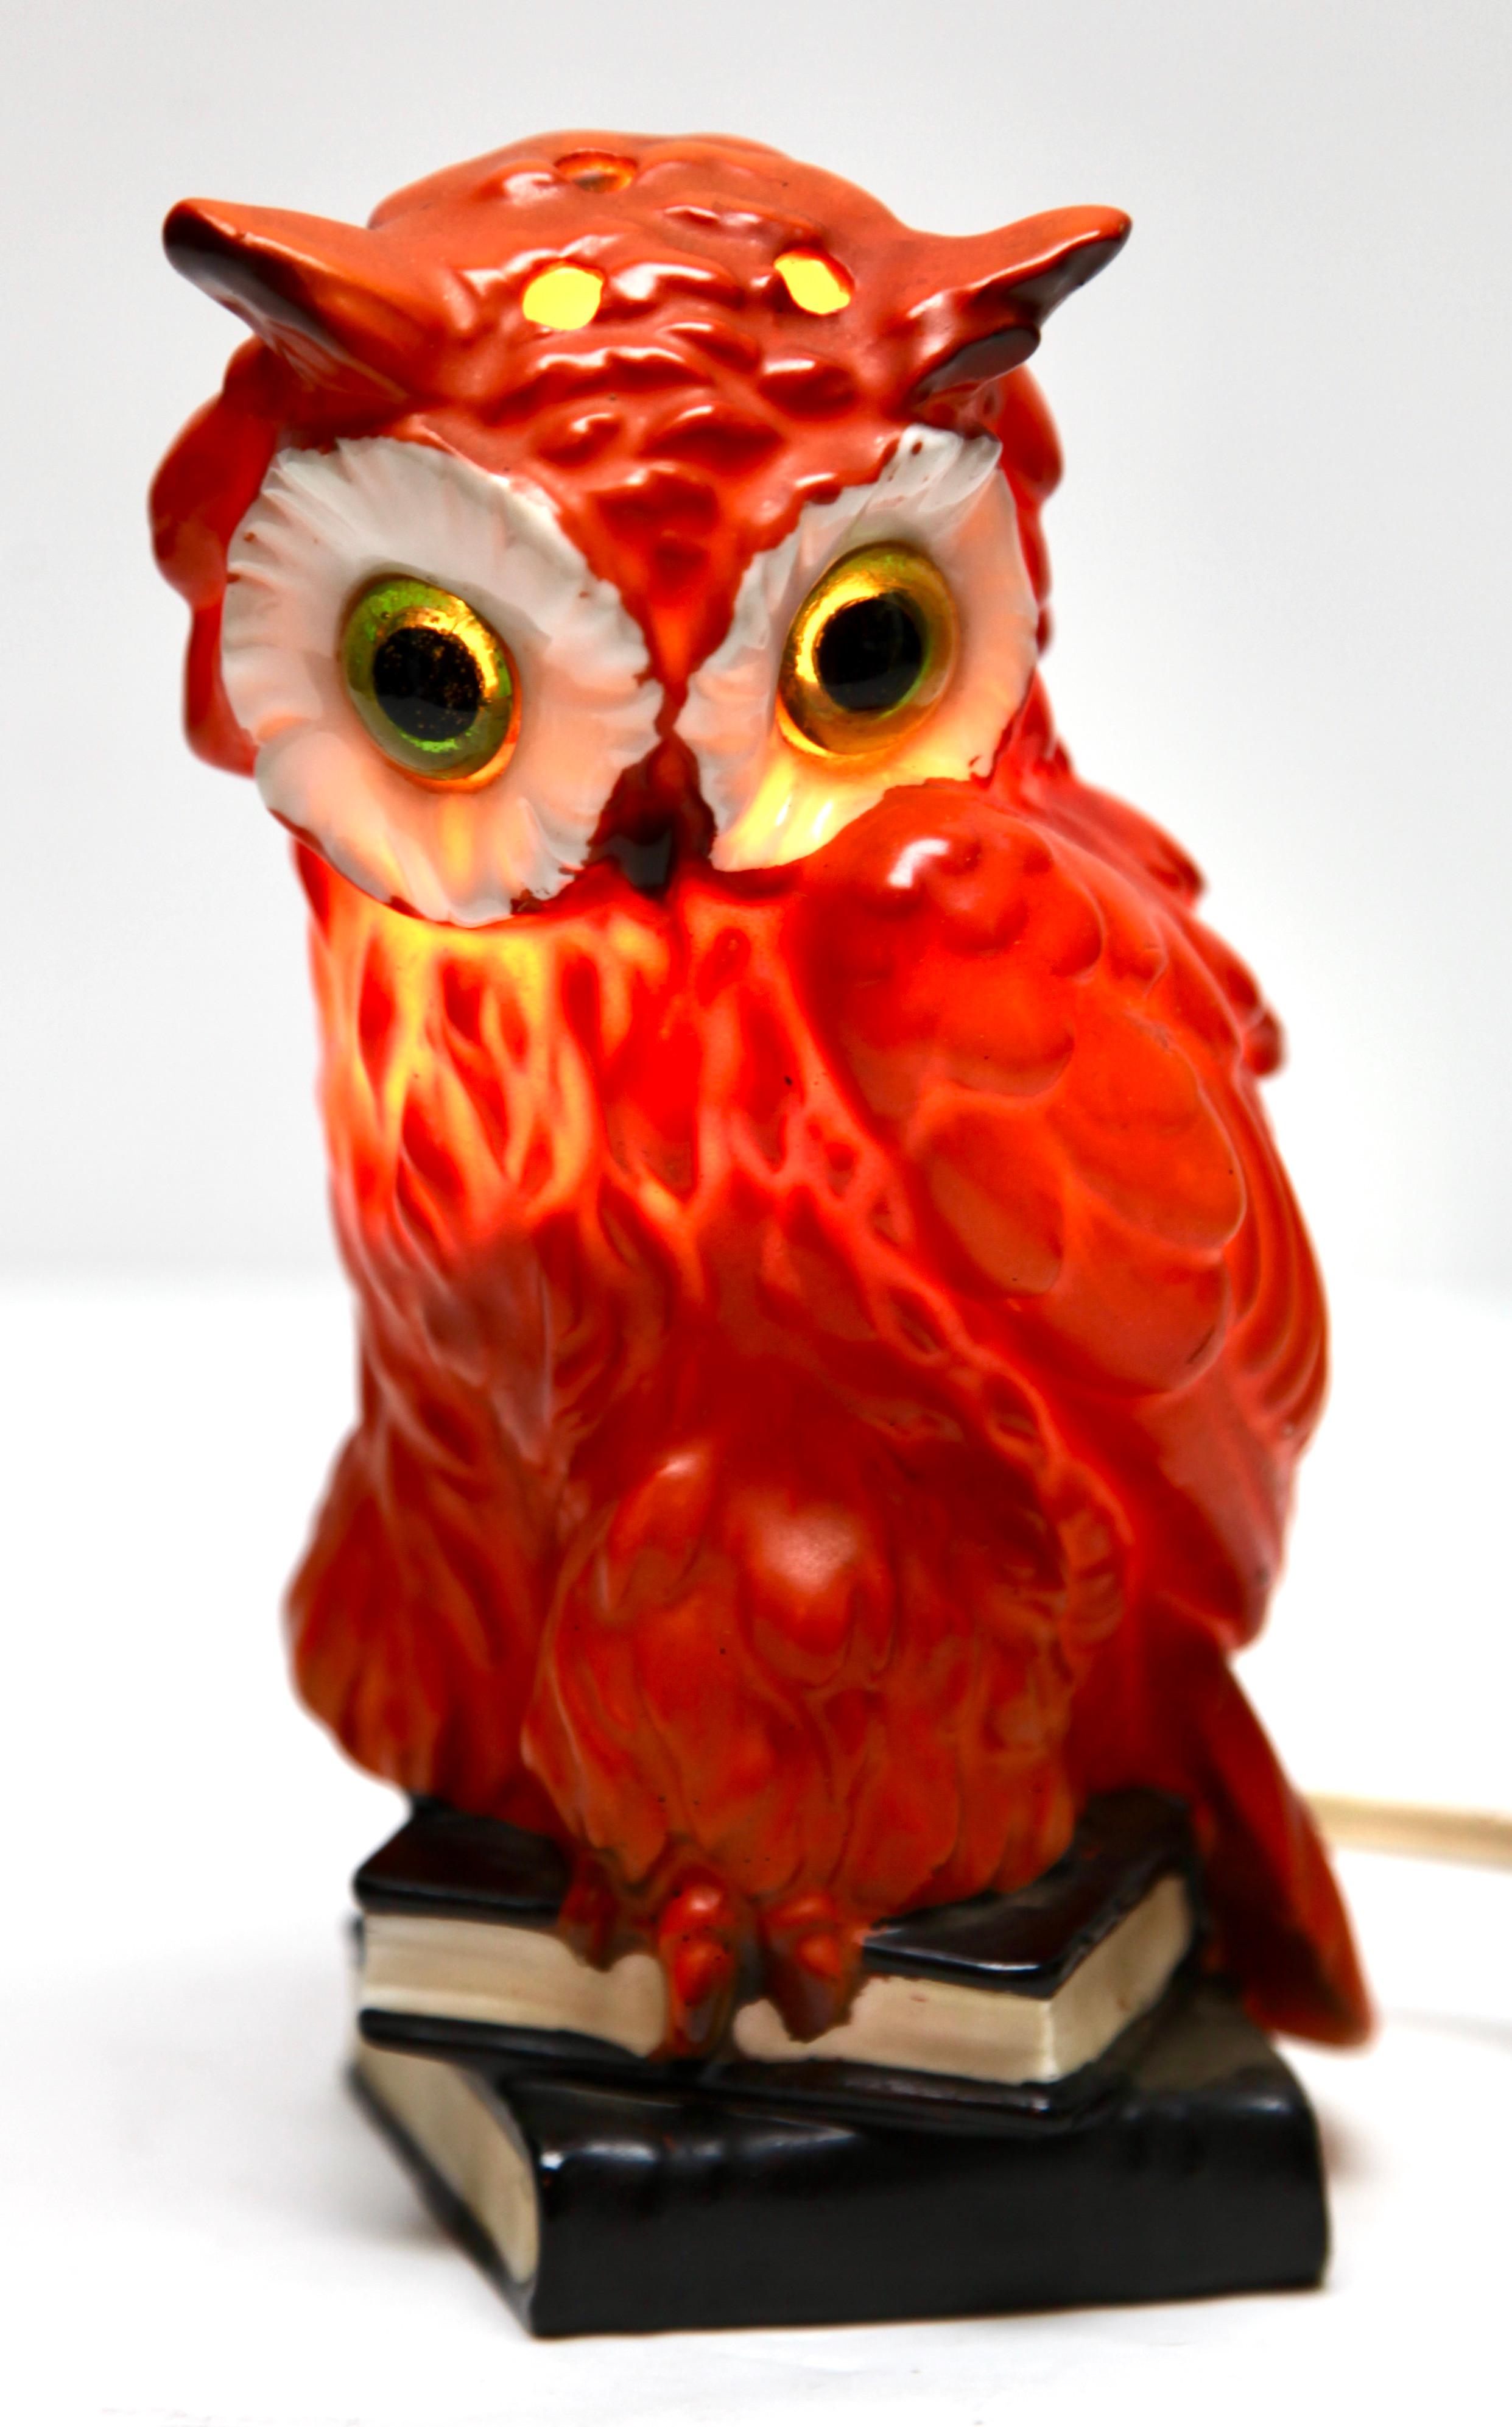 Perfume lamp in the form of an owl attributed to Carl Scheidig Grafenthal, Germany. 
Made from glazed porcelain. 
Electrical parts European standards with an inner light bulb (standard E 14) to give a warm and comforting night light. The light